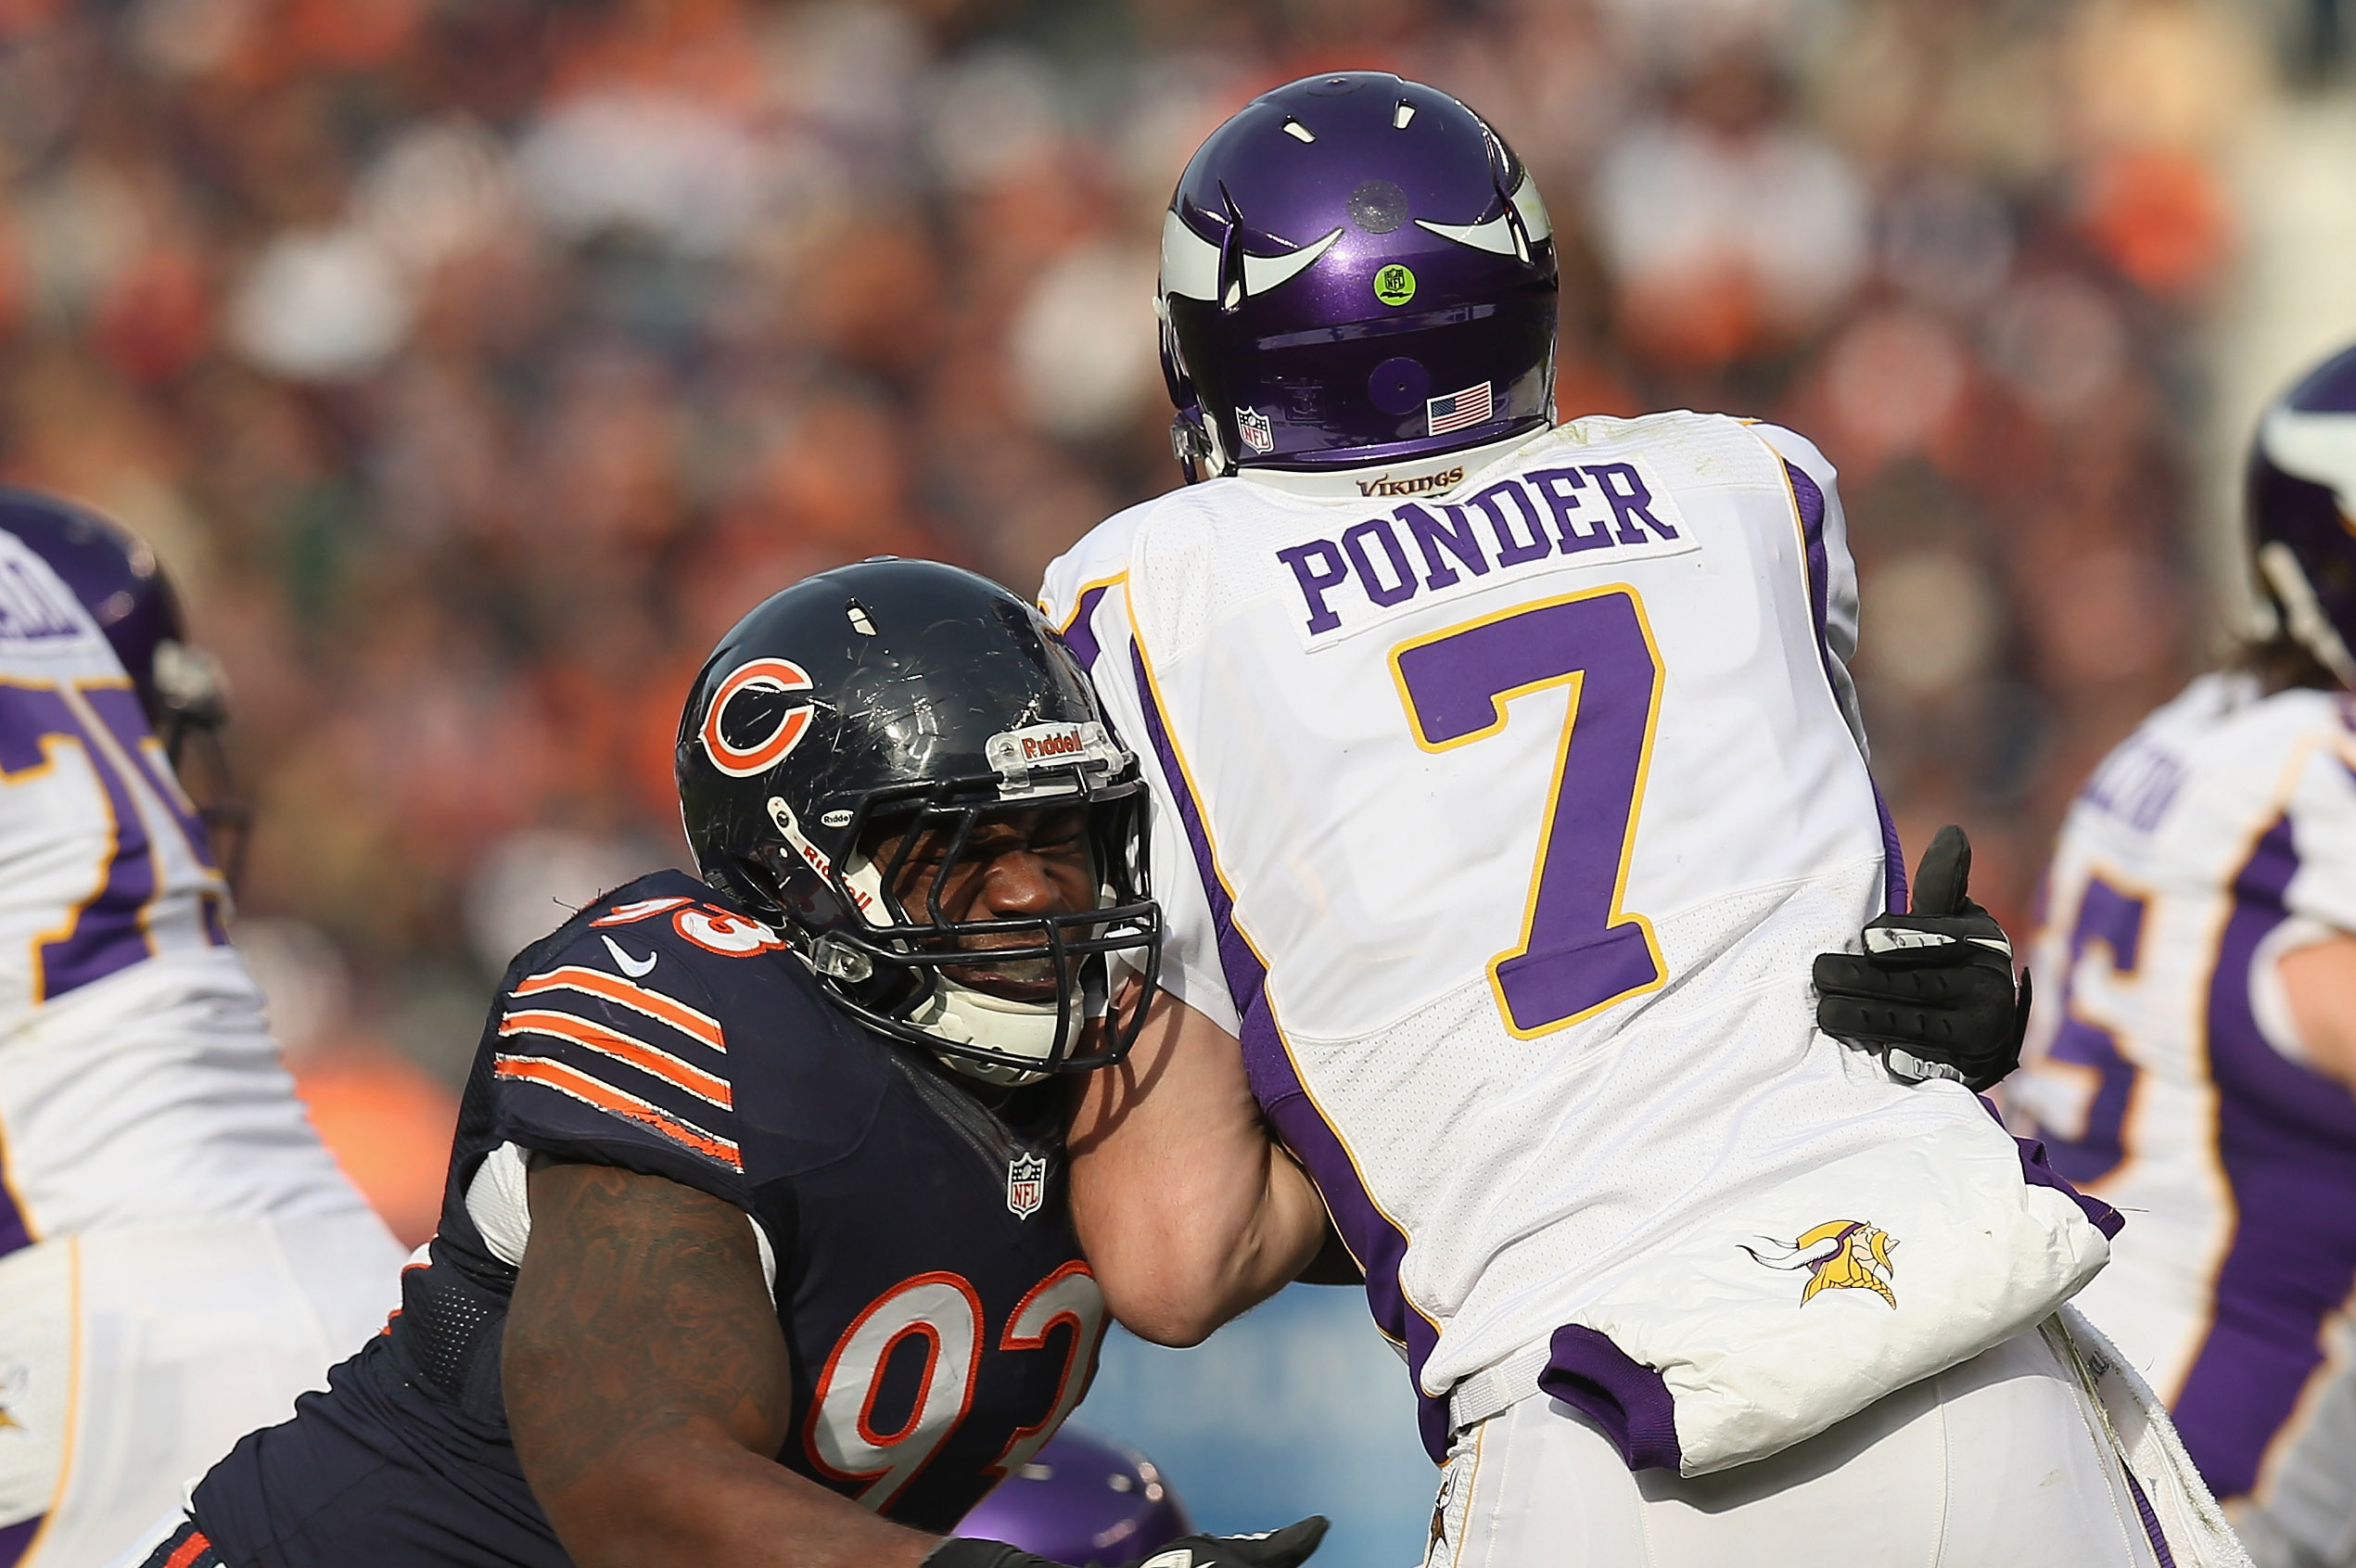 Christian Ponder Besting NFC North QBs Early - The Sports Daily